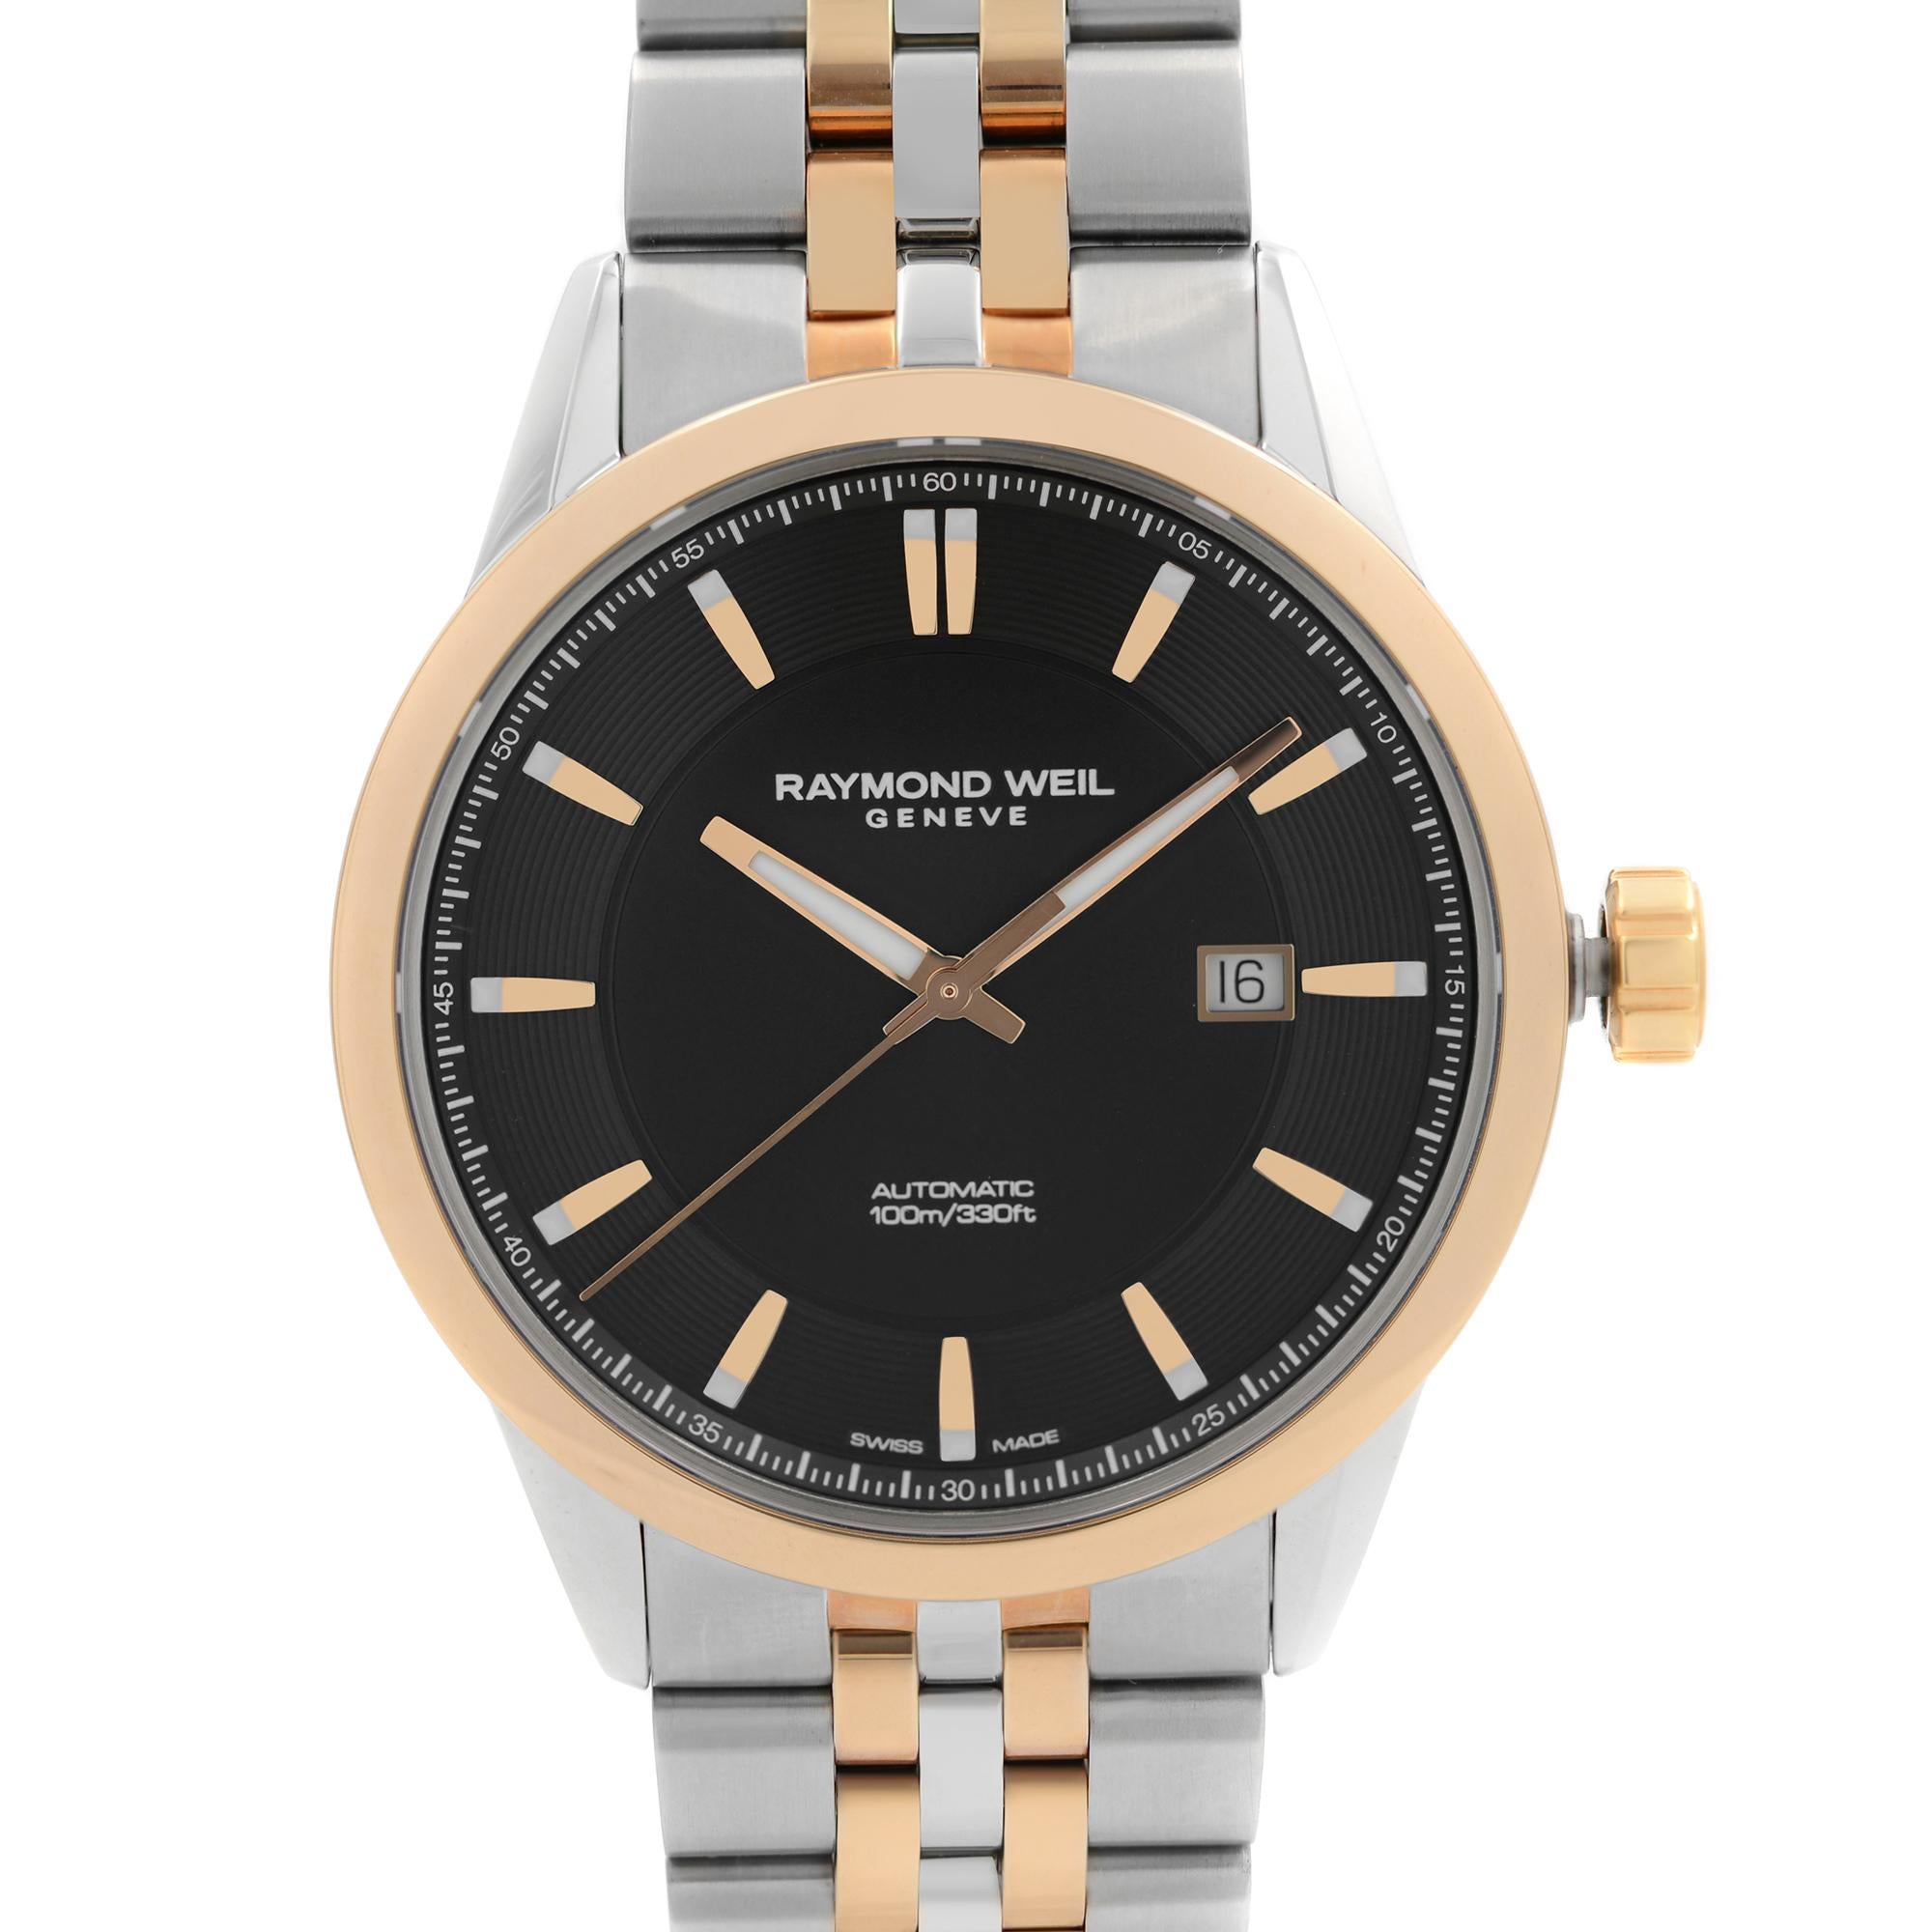 The watch has never been worn or used. It may have micro marks from store handling. Original box and papers are included. Warranty.


Details:
Brand RAYMOND WEIL
Department Men
Model Number 2731-SP5-20001
Country/Region of Manufacture